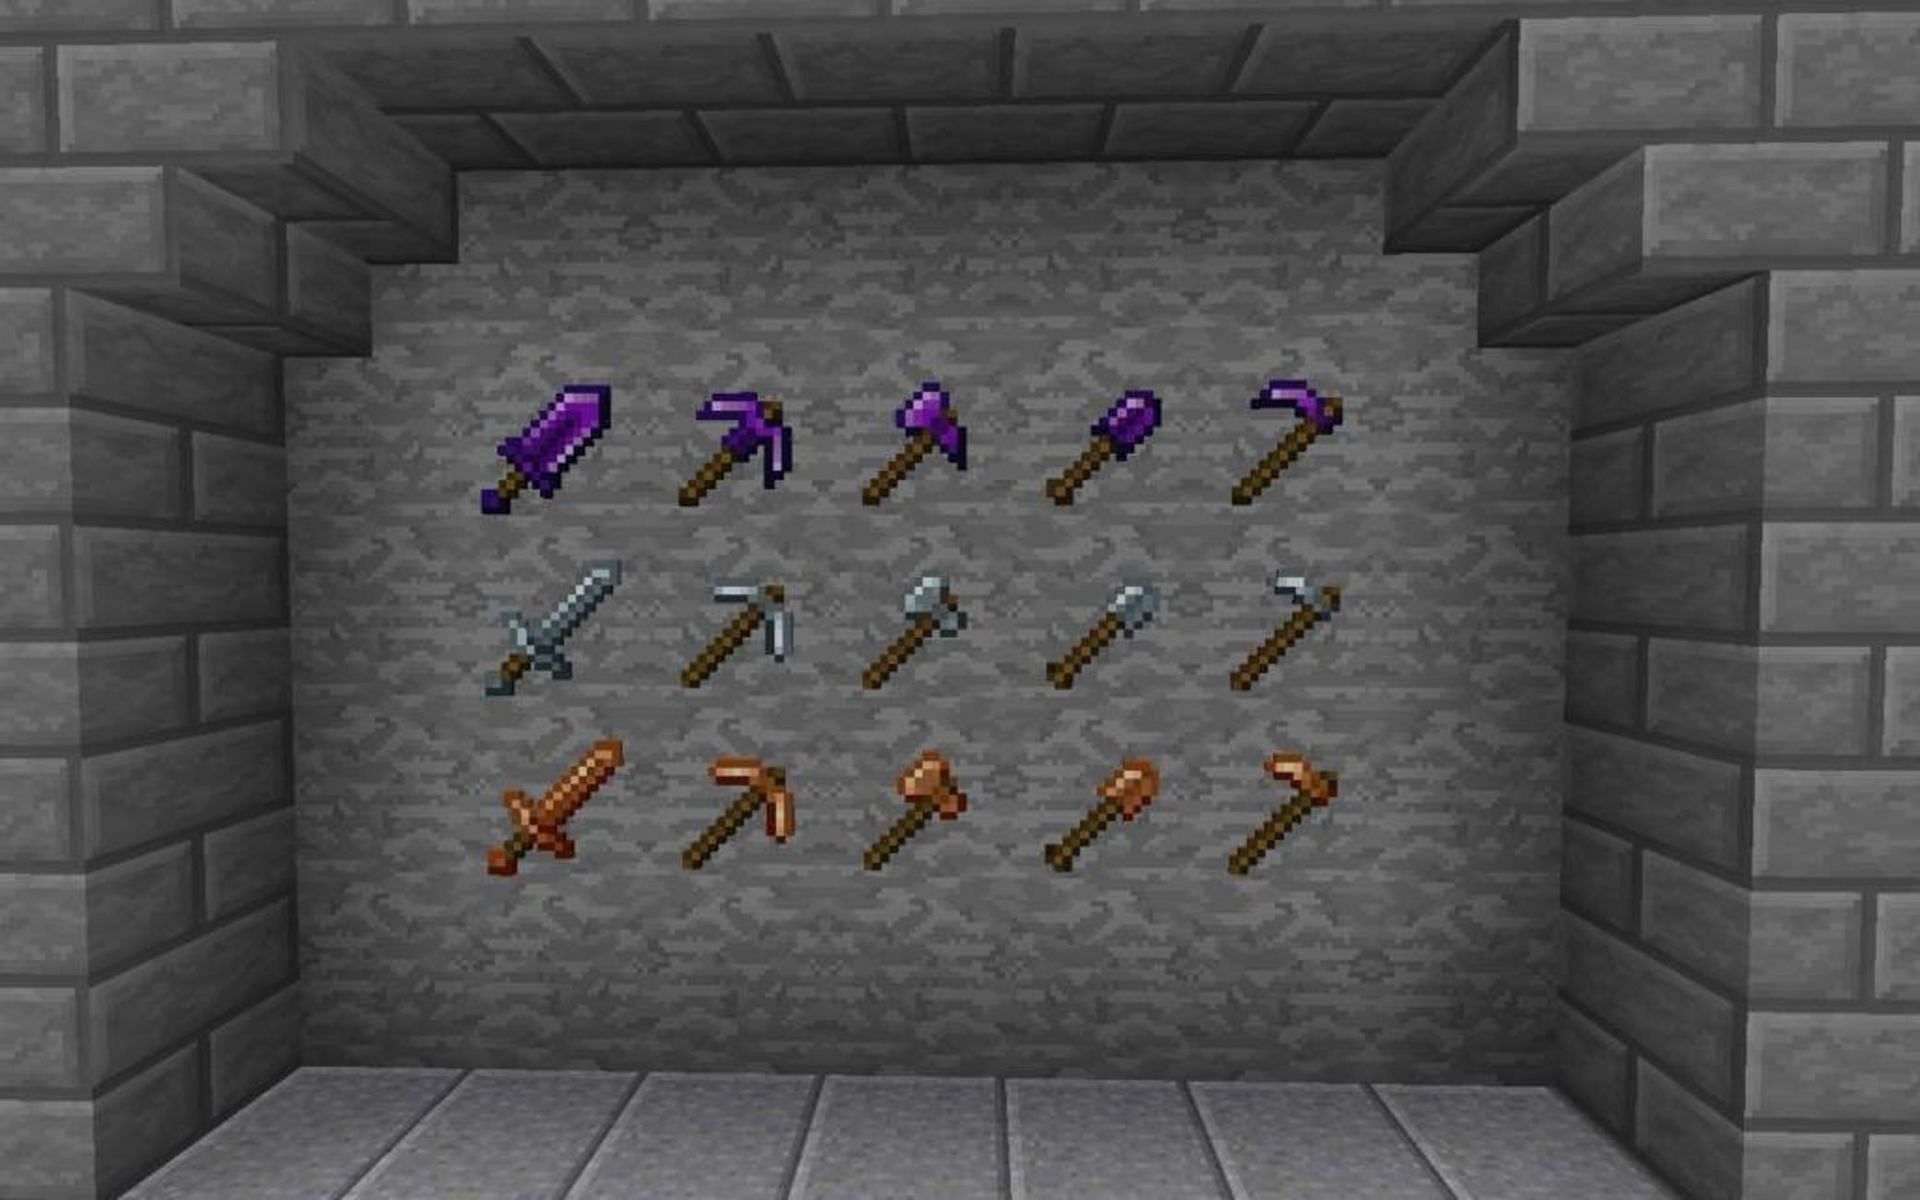 New gear types provided by additional materials in Mystical World (Image via Minecraft Amino)